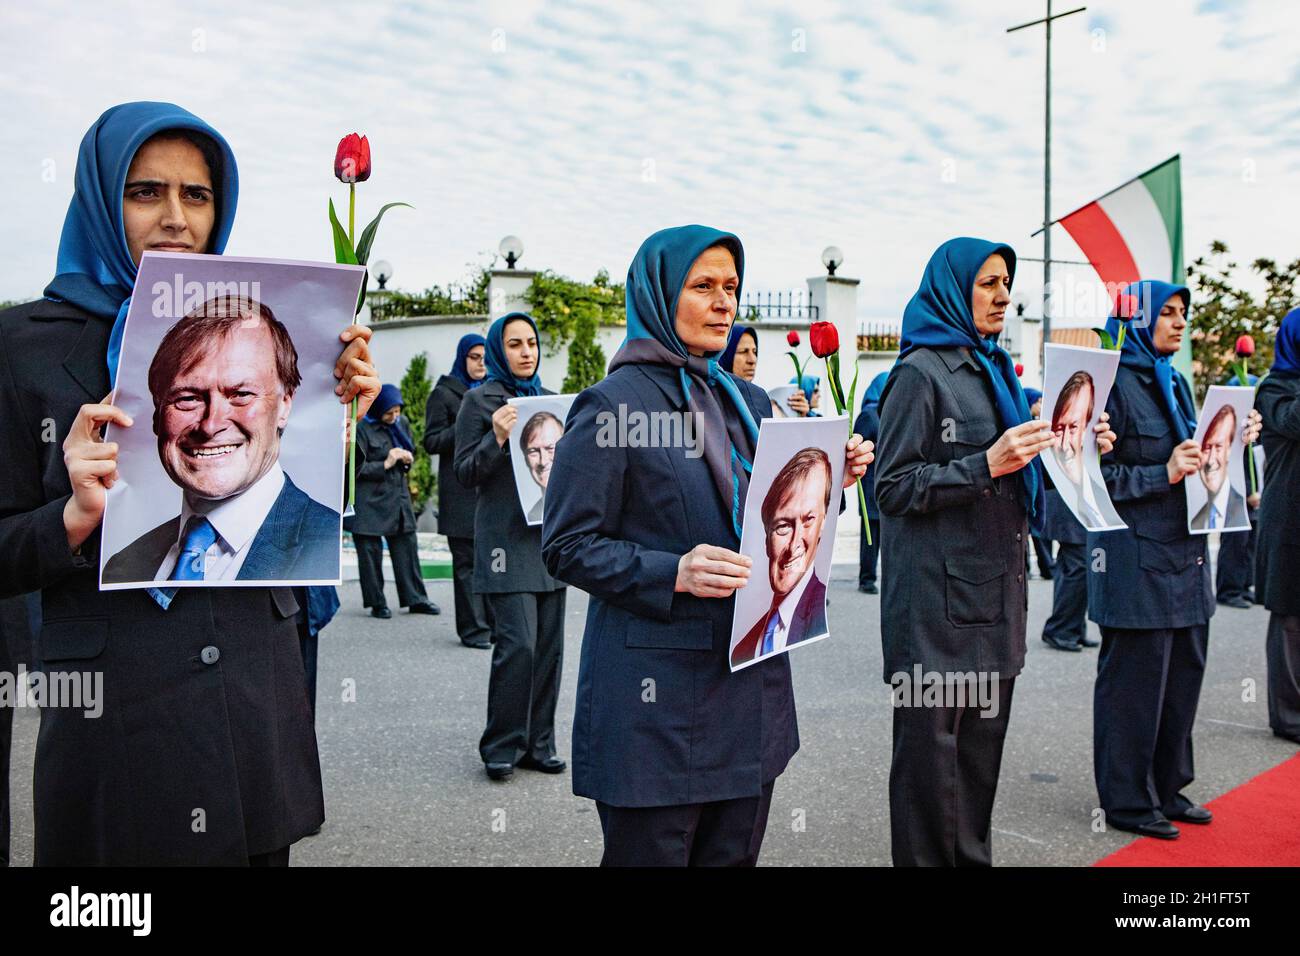 Members of the main Iranian opposition group, the Mojahedin-e Khalq (MEK) in Ashraf-3, Albania hold pictures of the Sir David Amess, during the ceremonies in tribute to the late British MP, who was brutally murdered at a church in Leigh-on-Sea on October 15. (Photo by Siavosh Hosseini/SOPA Images/Sipa USA) Credit: Sipa USA/Alamy Live News Stock Photo